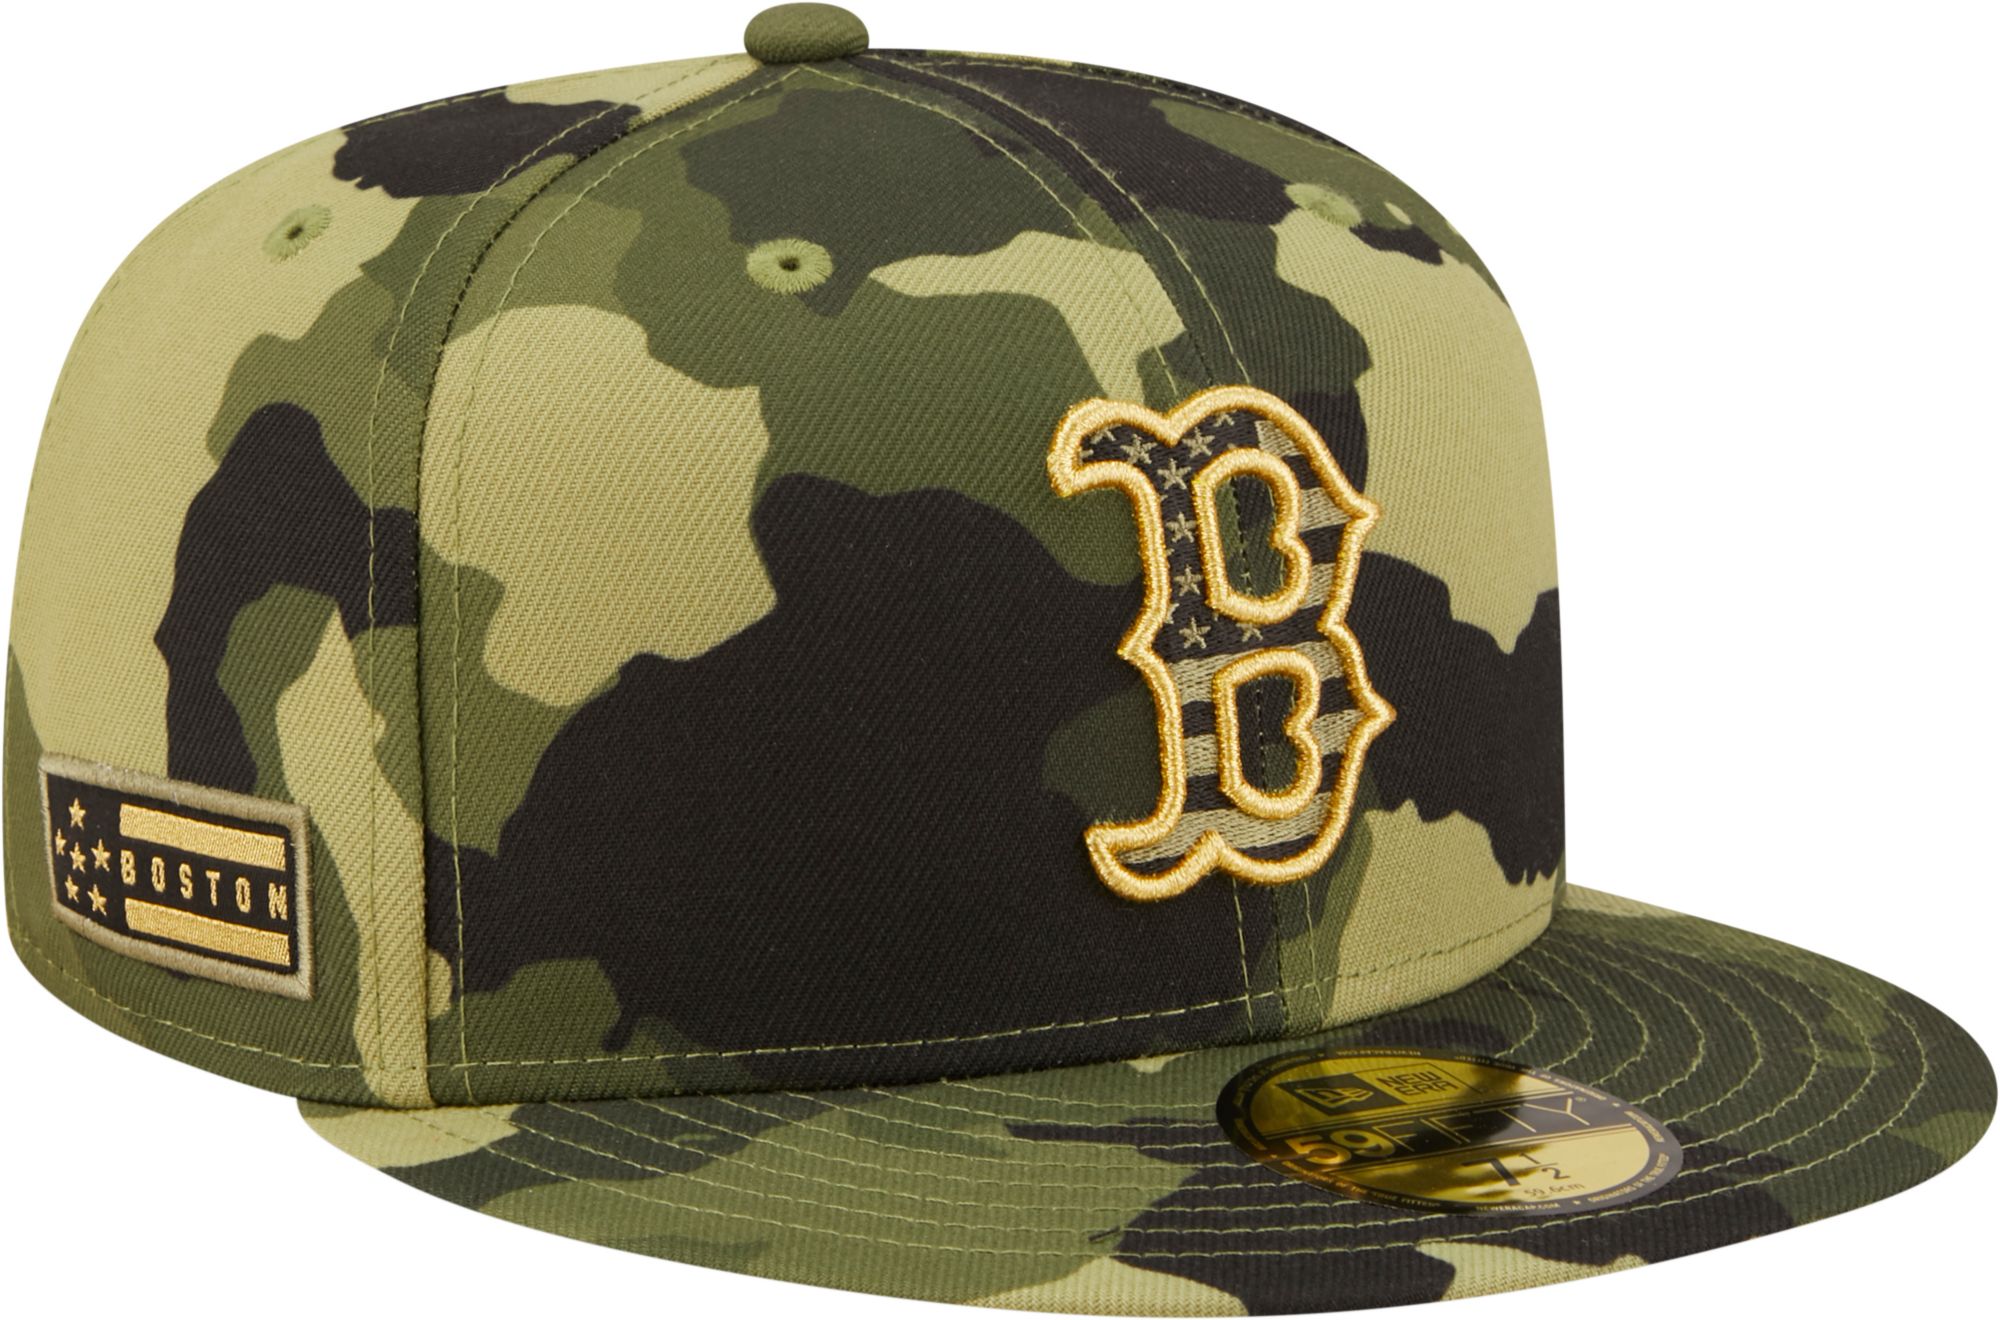 2021 Detroit Tigers Armed Forces 59FIFTY Fitted Cap - Vintage